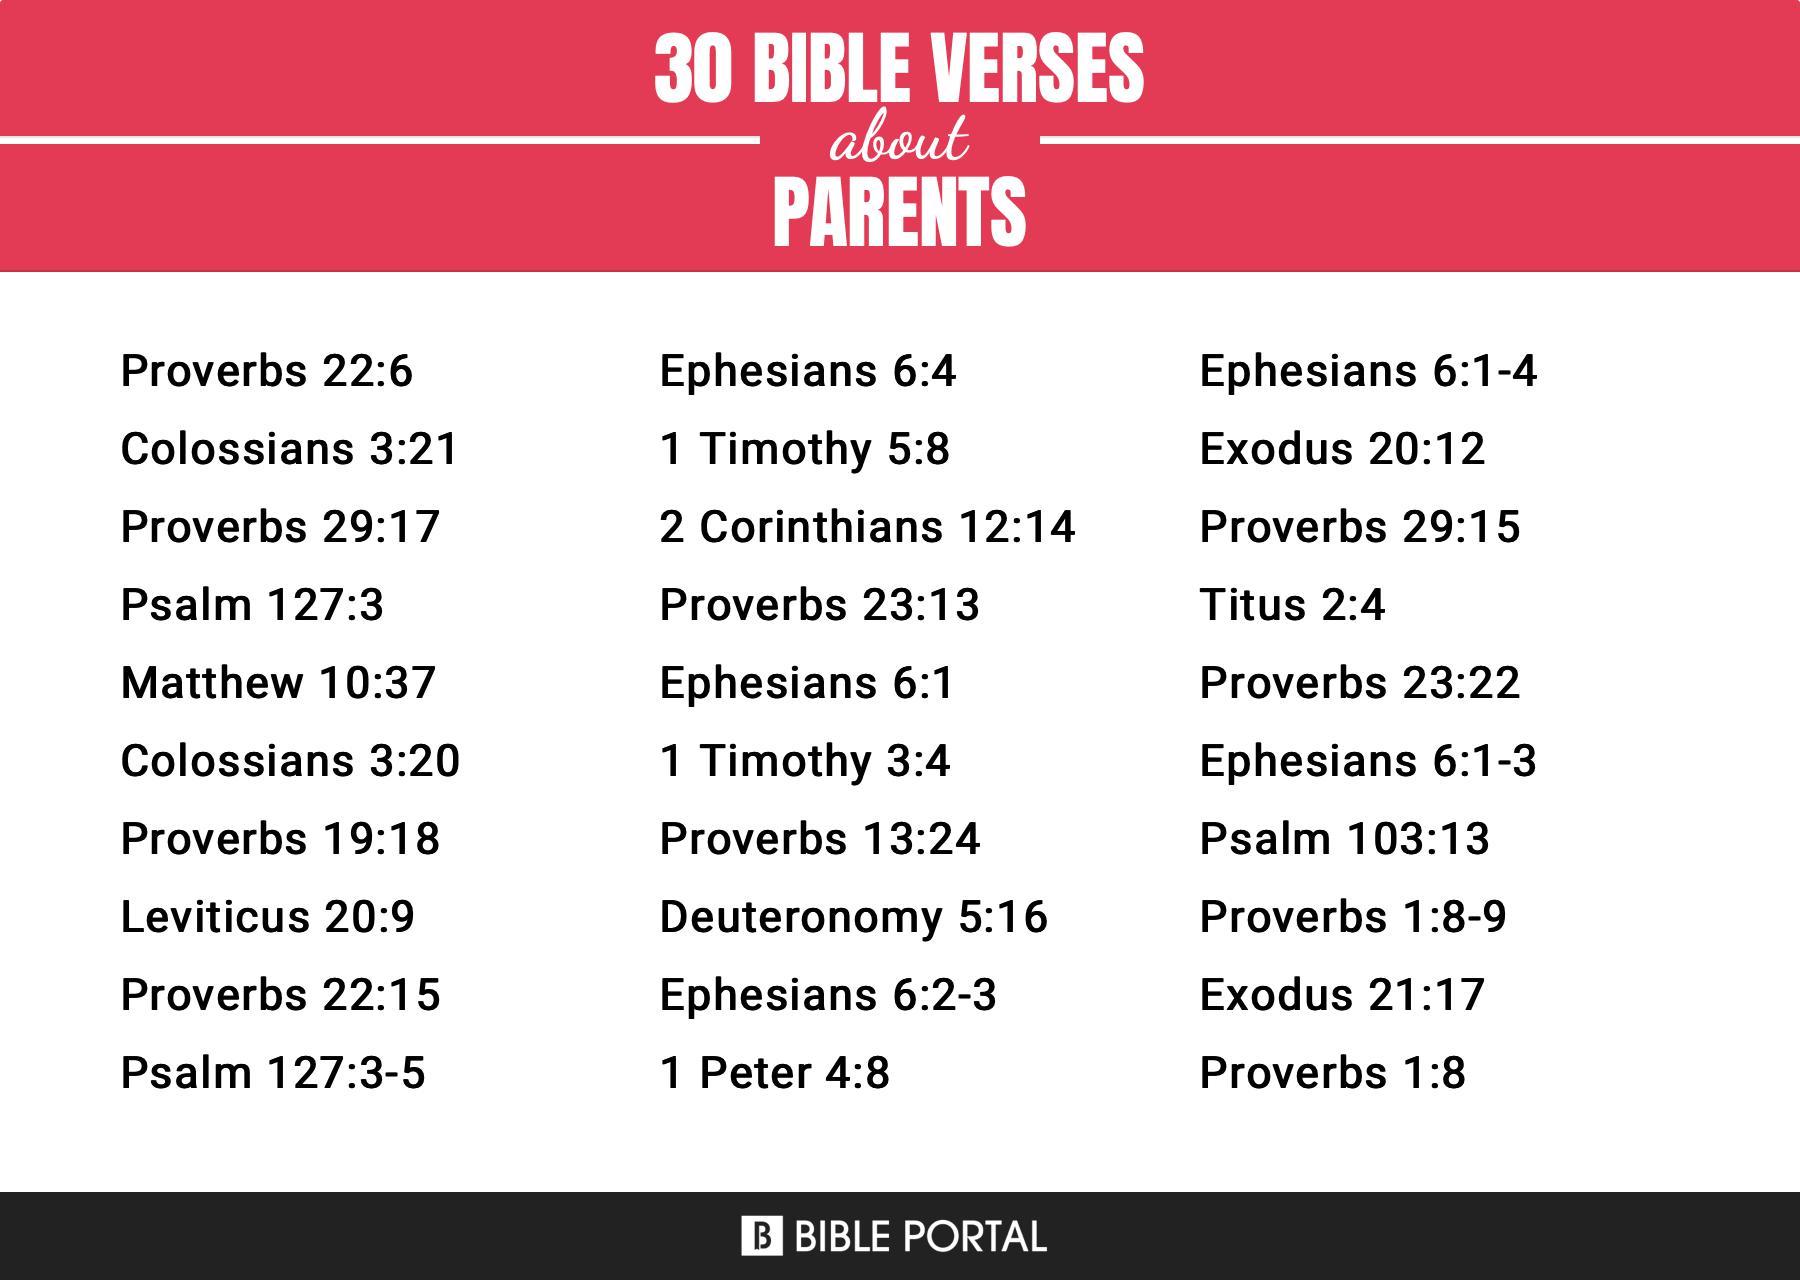 What Does the Bible Say about Parents?